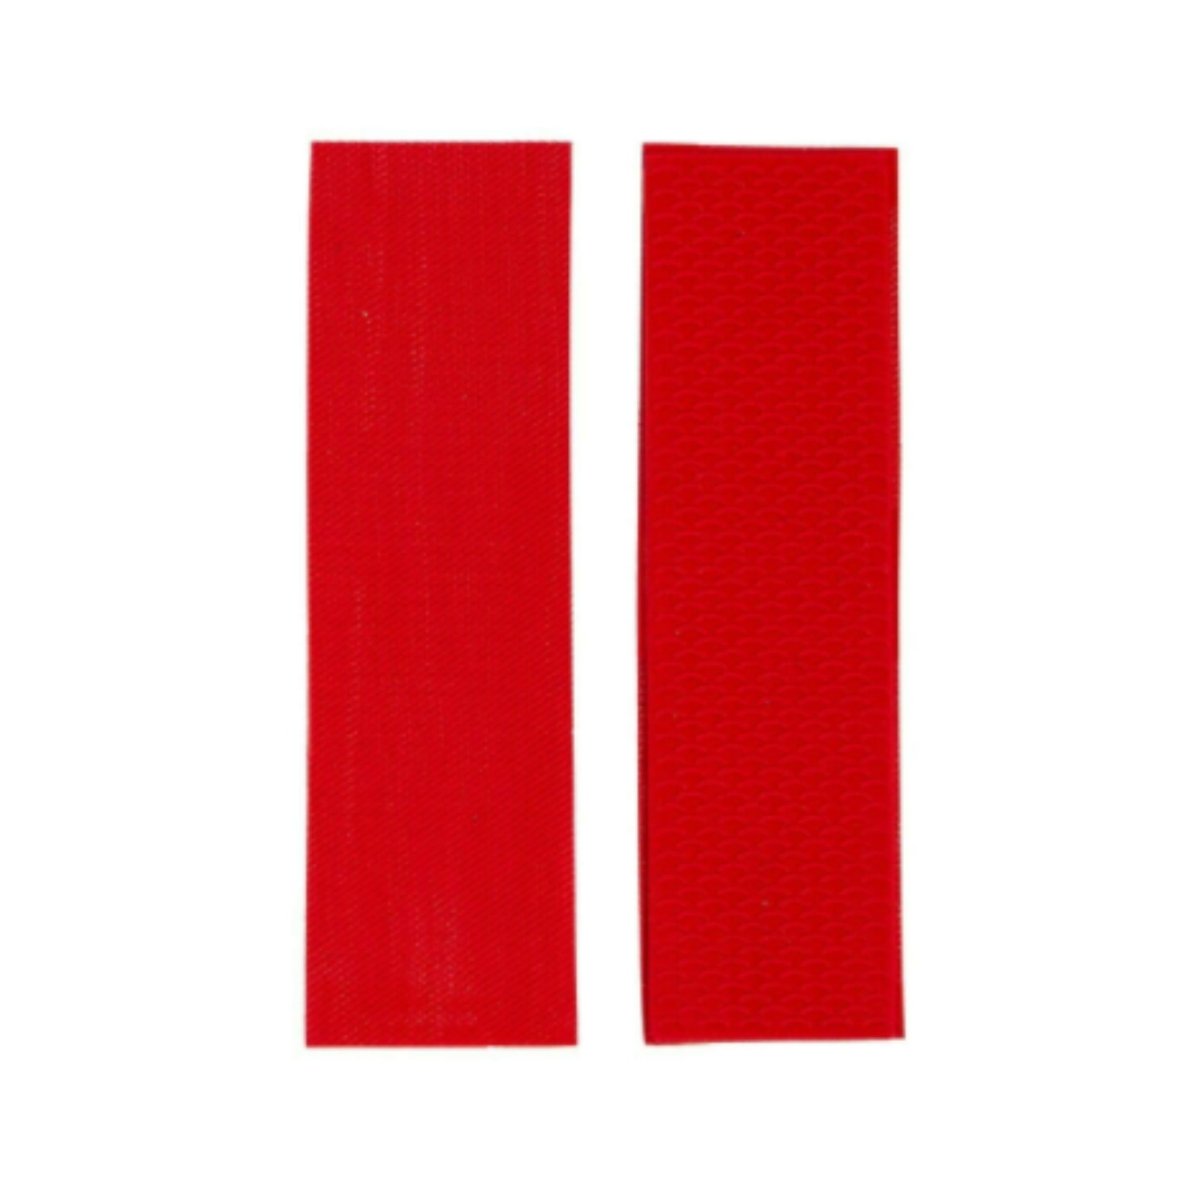 Toe Guard Red Colour Pack of 2.